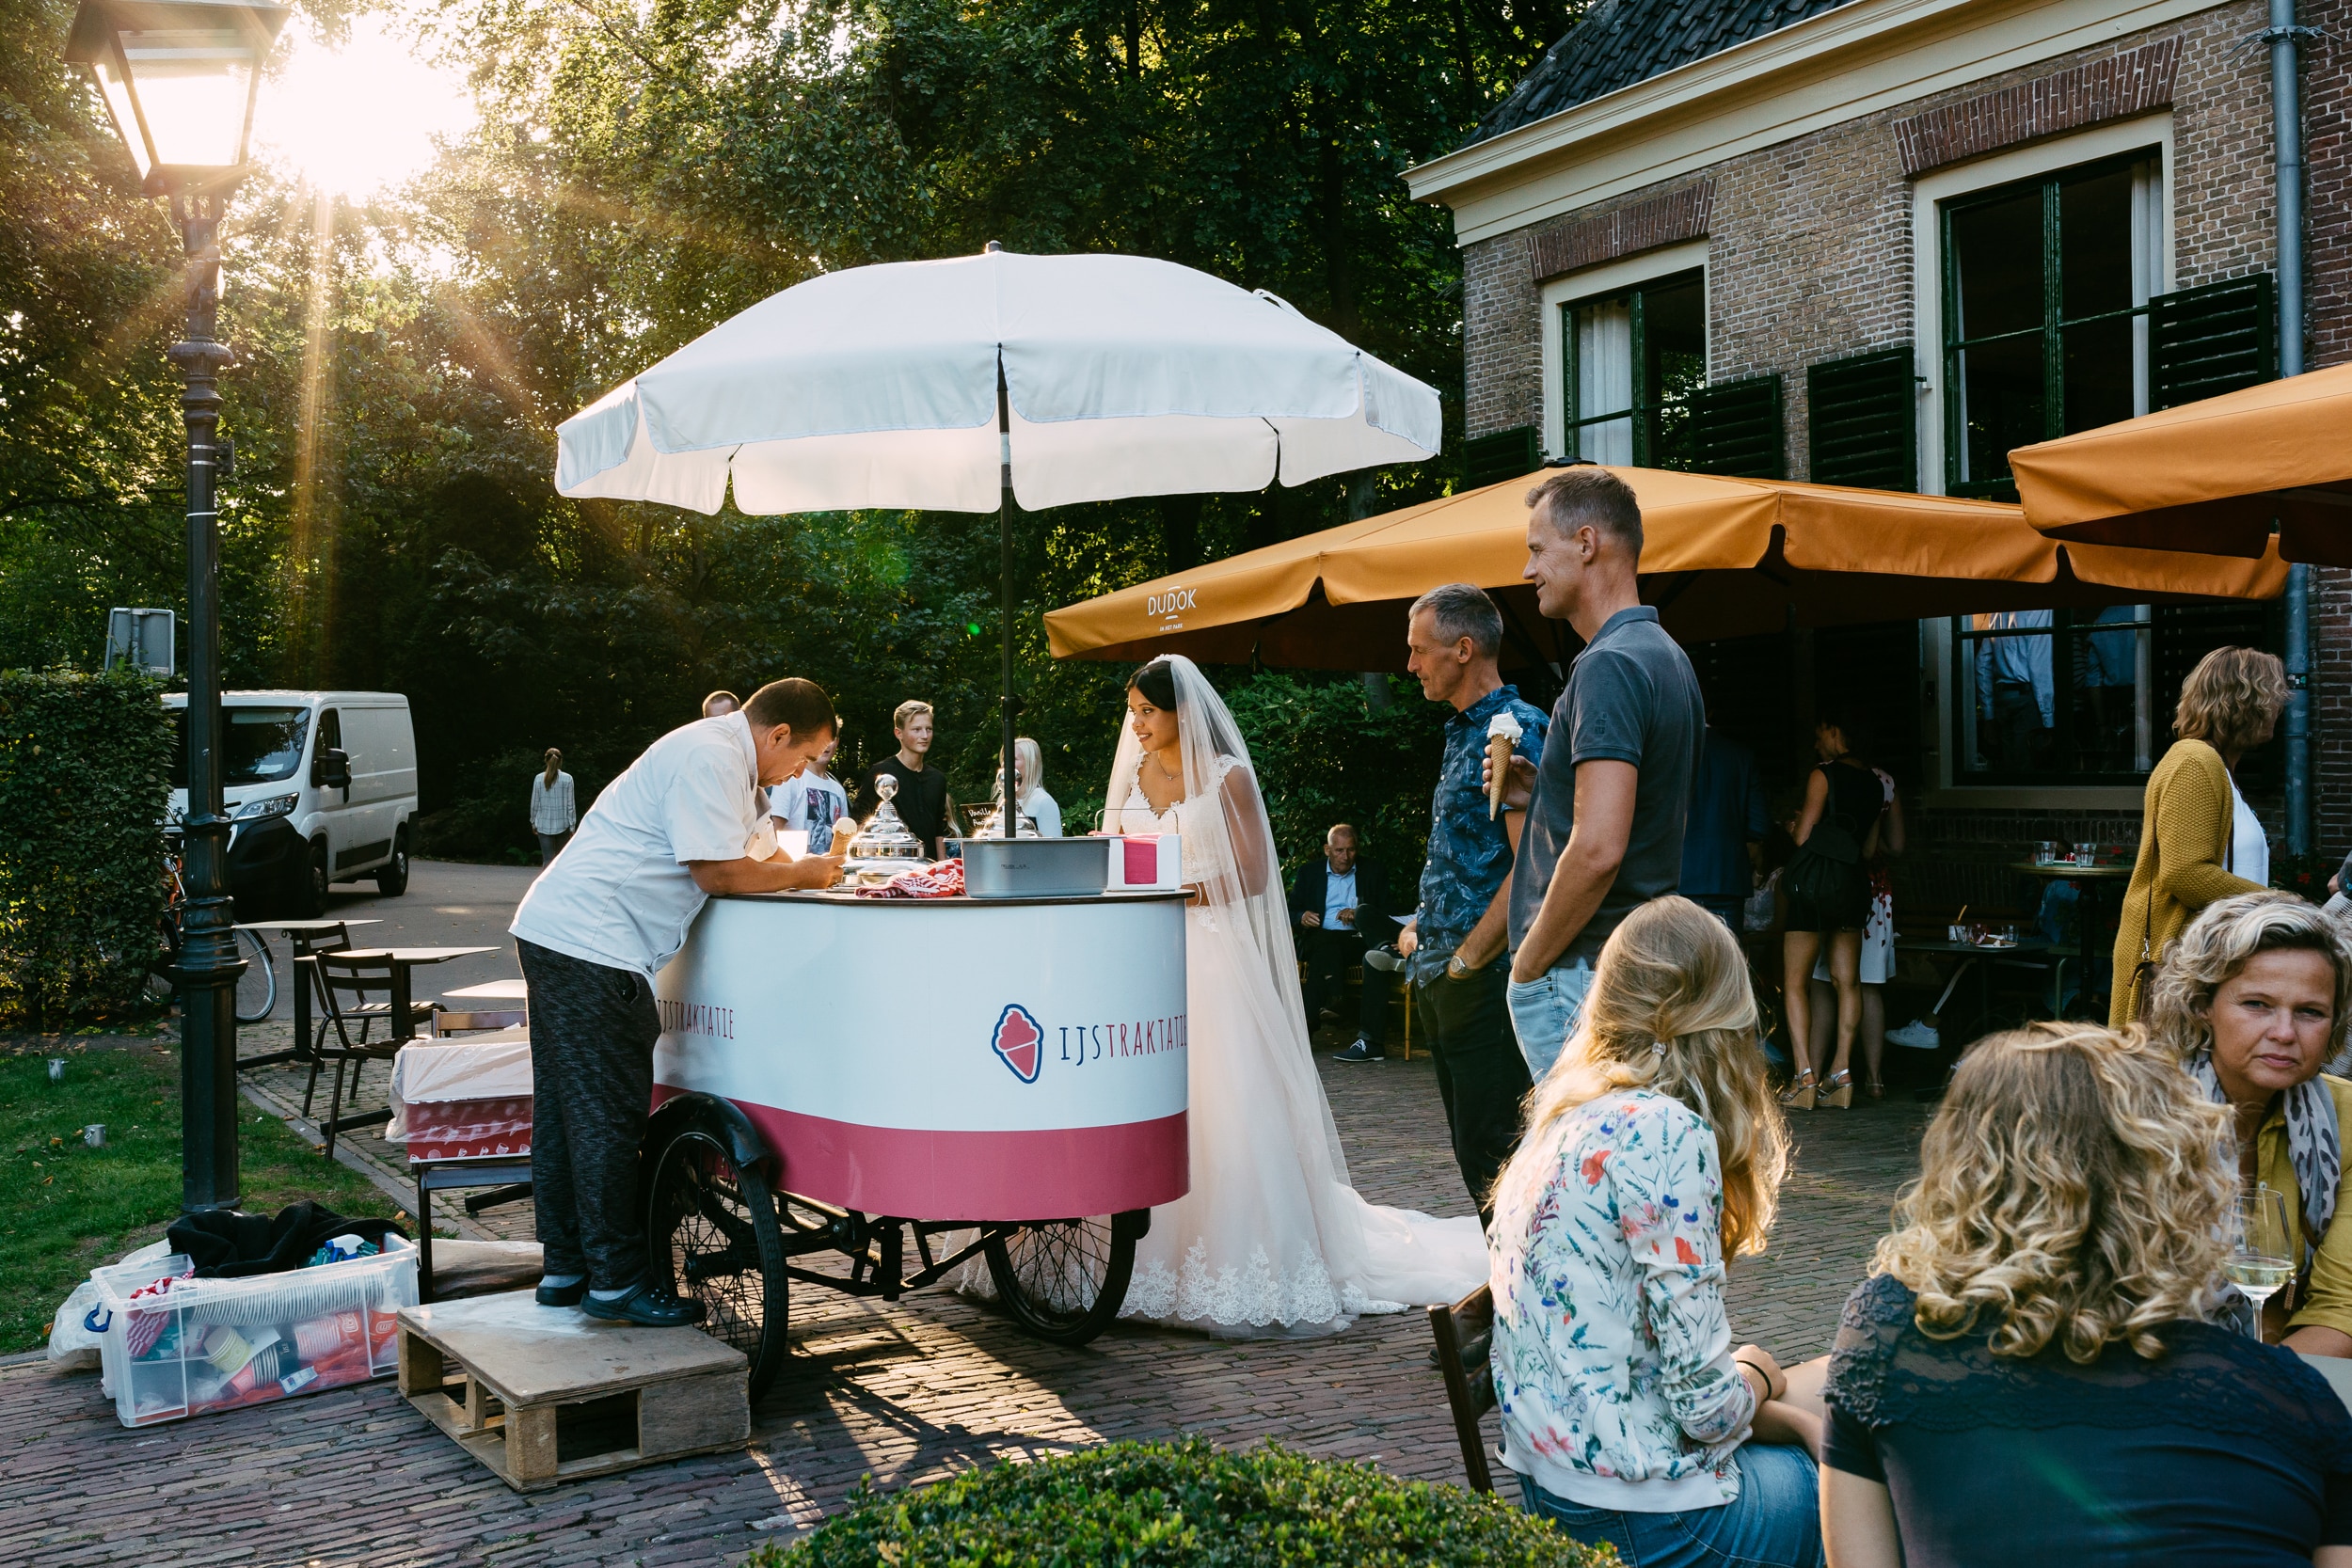 A group of people enjoying ice cream at a cart during wedding photography.